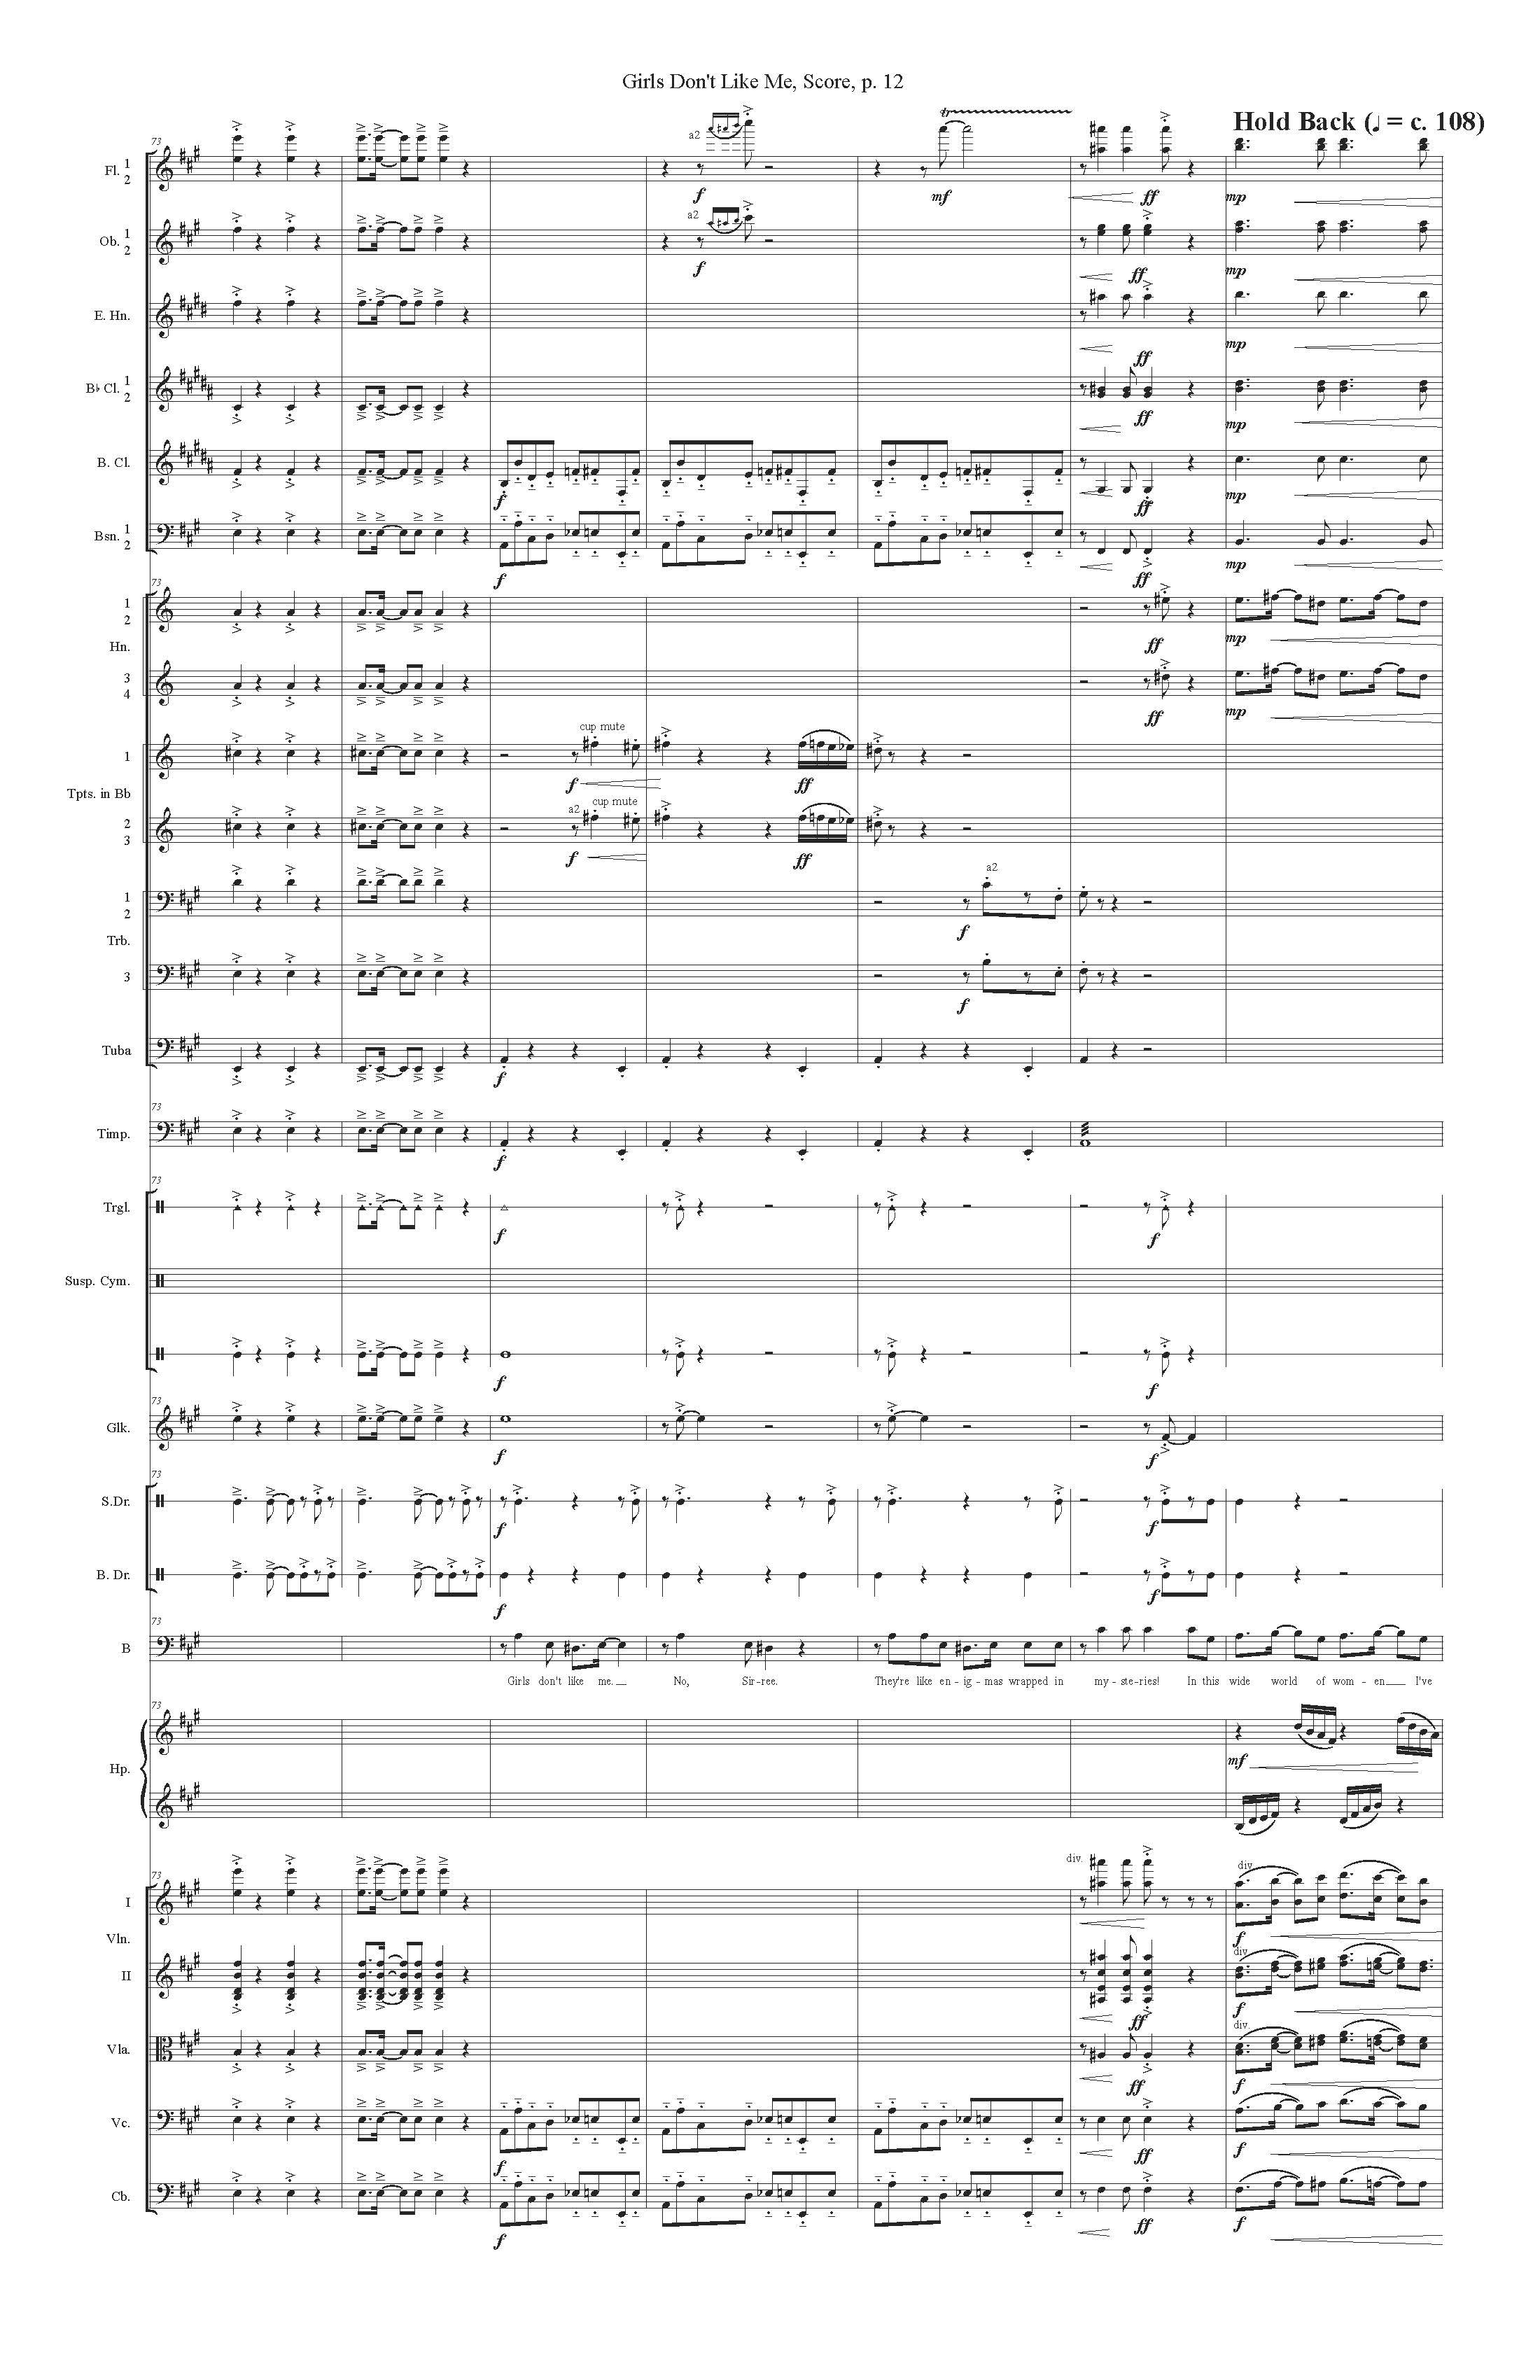 GIRLS DON'T LIKE ME ORCH - Score_Page_12.jpg